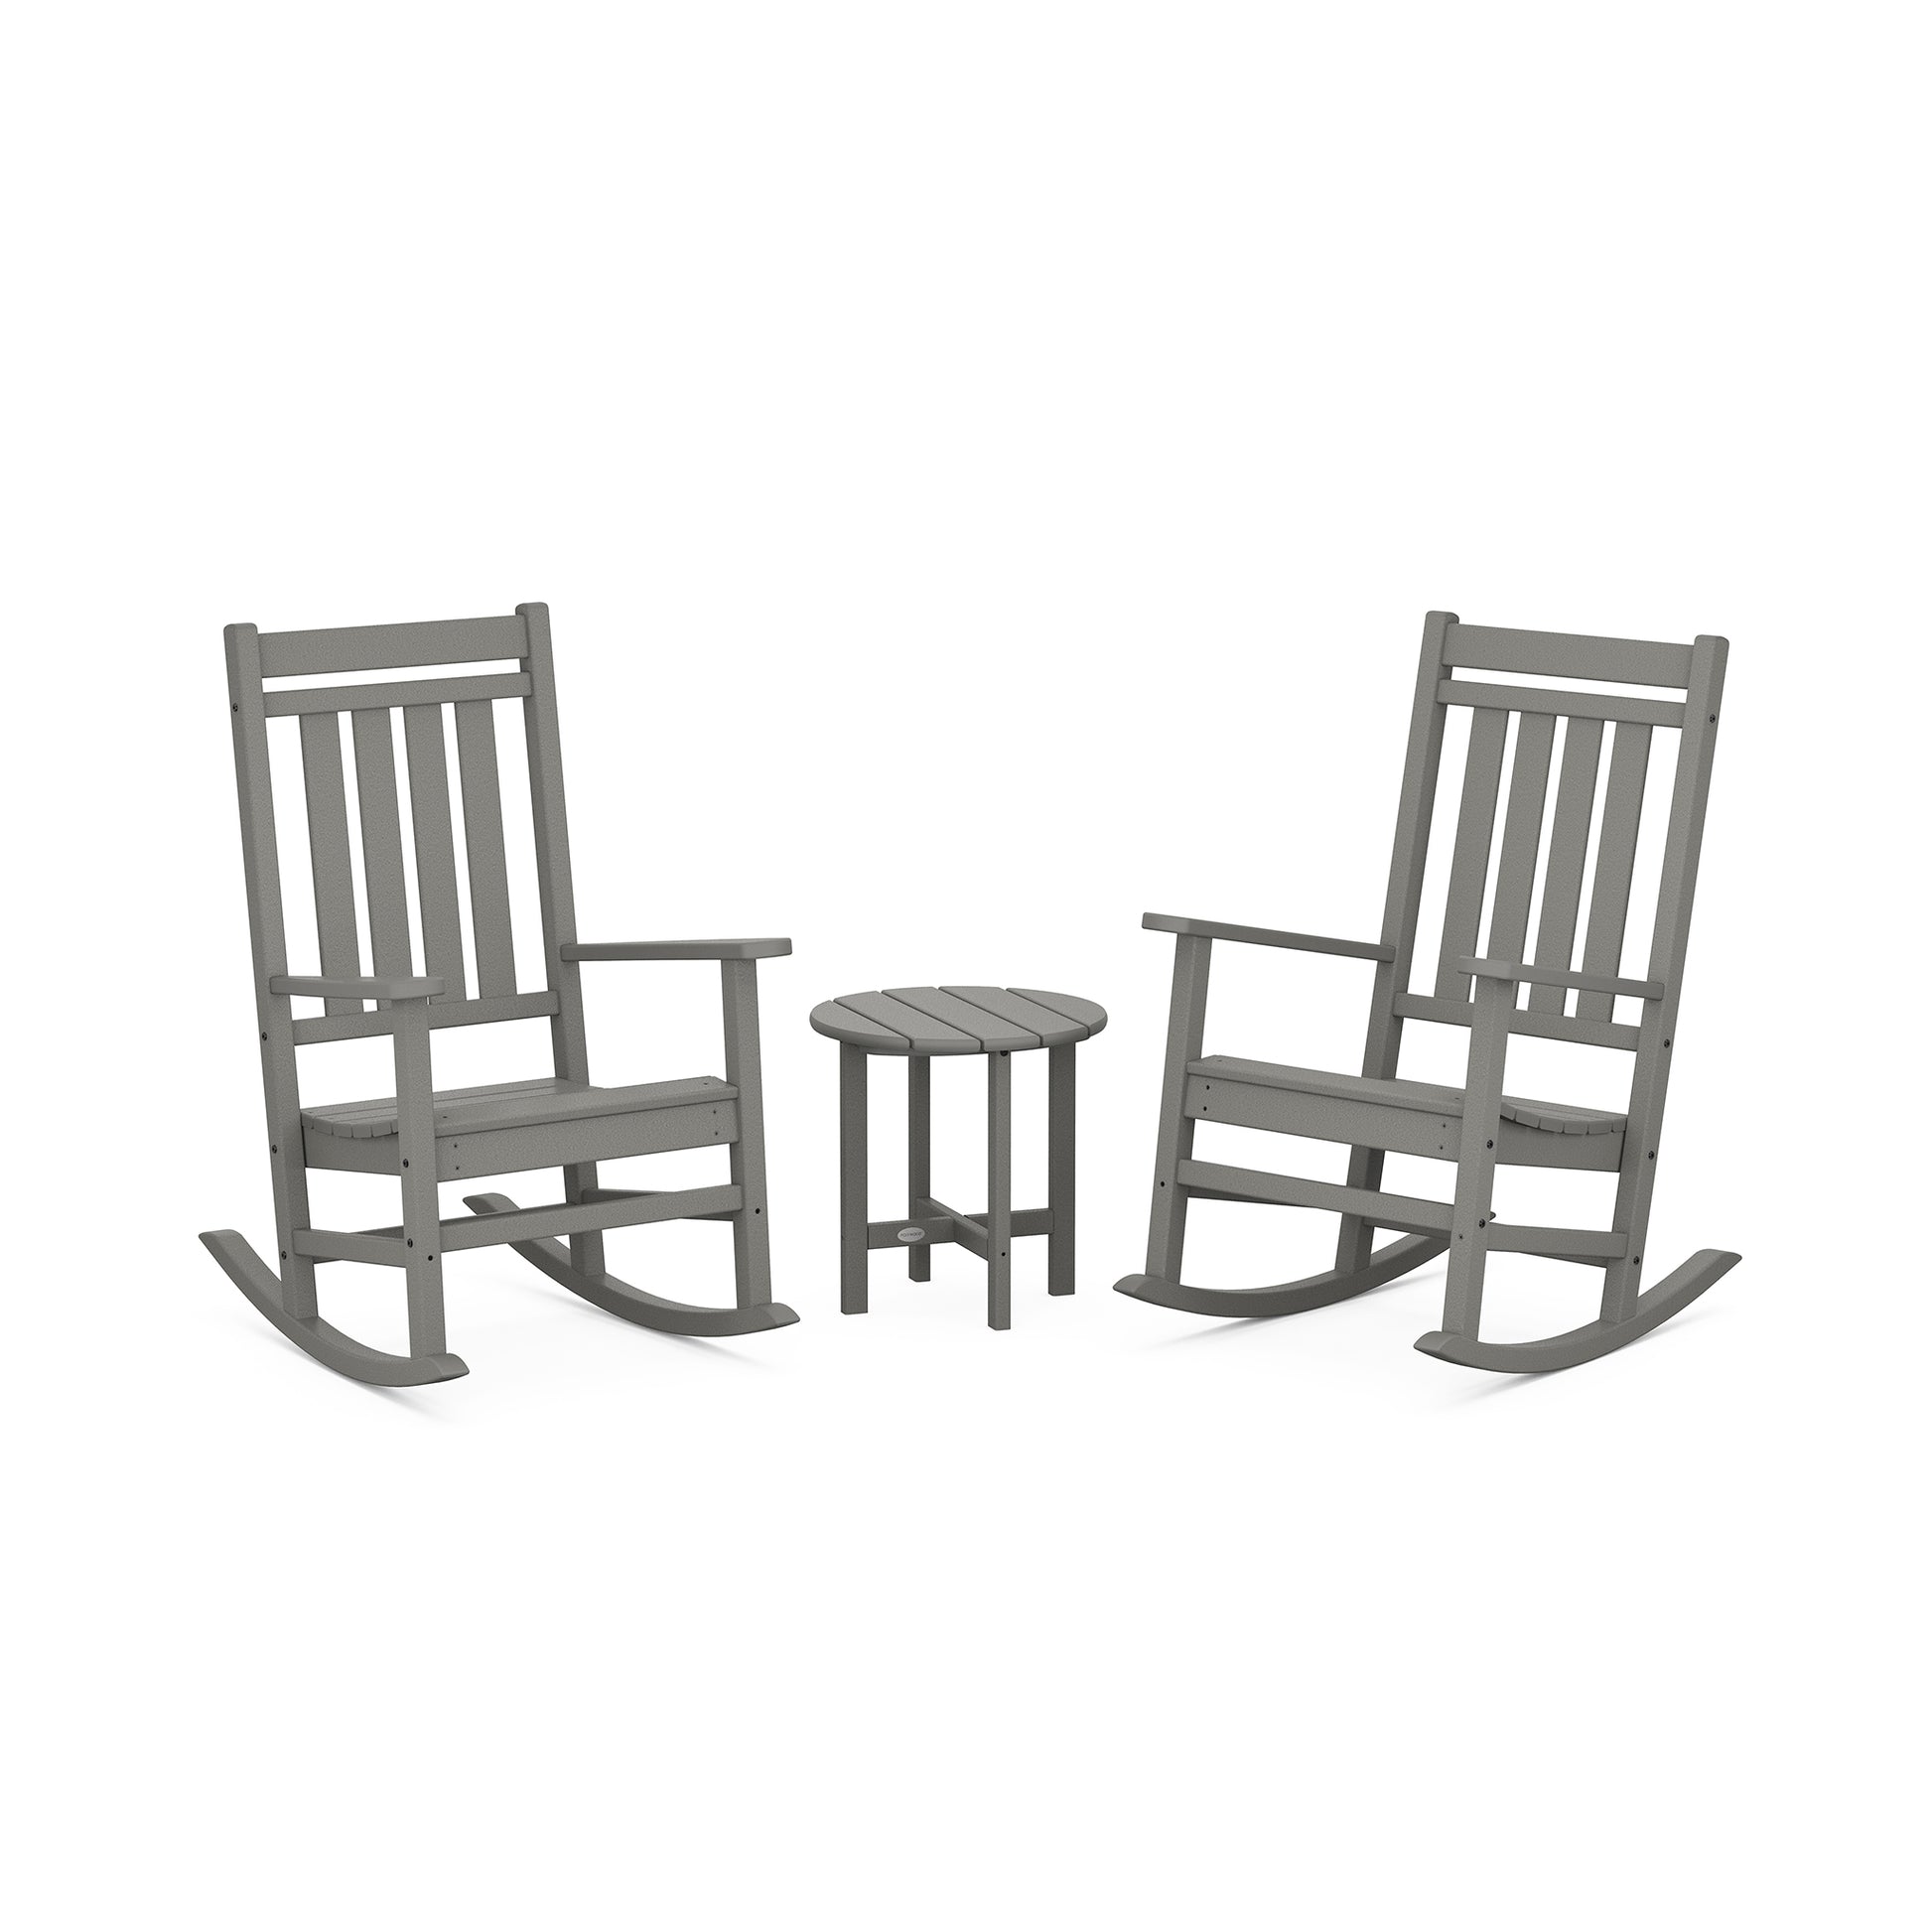 Two gray POLYWOOD Estate Rocking Chairs facing each other with a small matching side table in between, set against a plain white background.